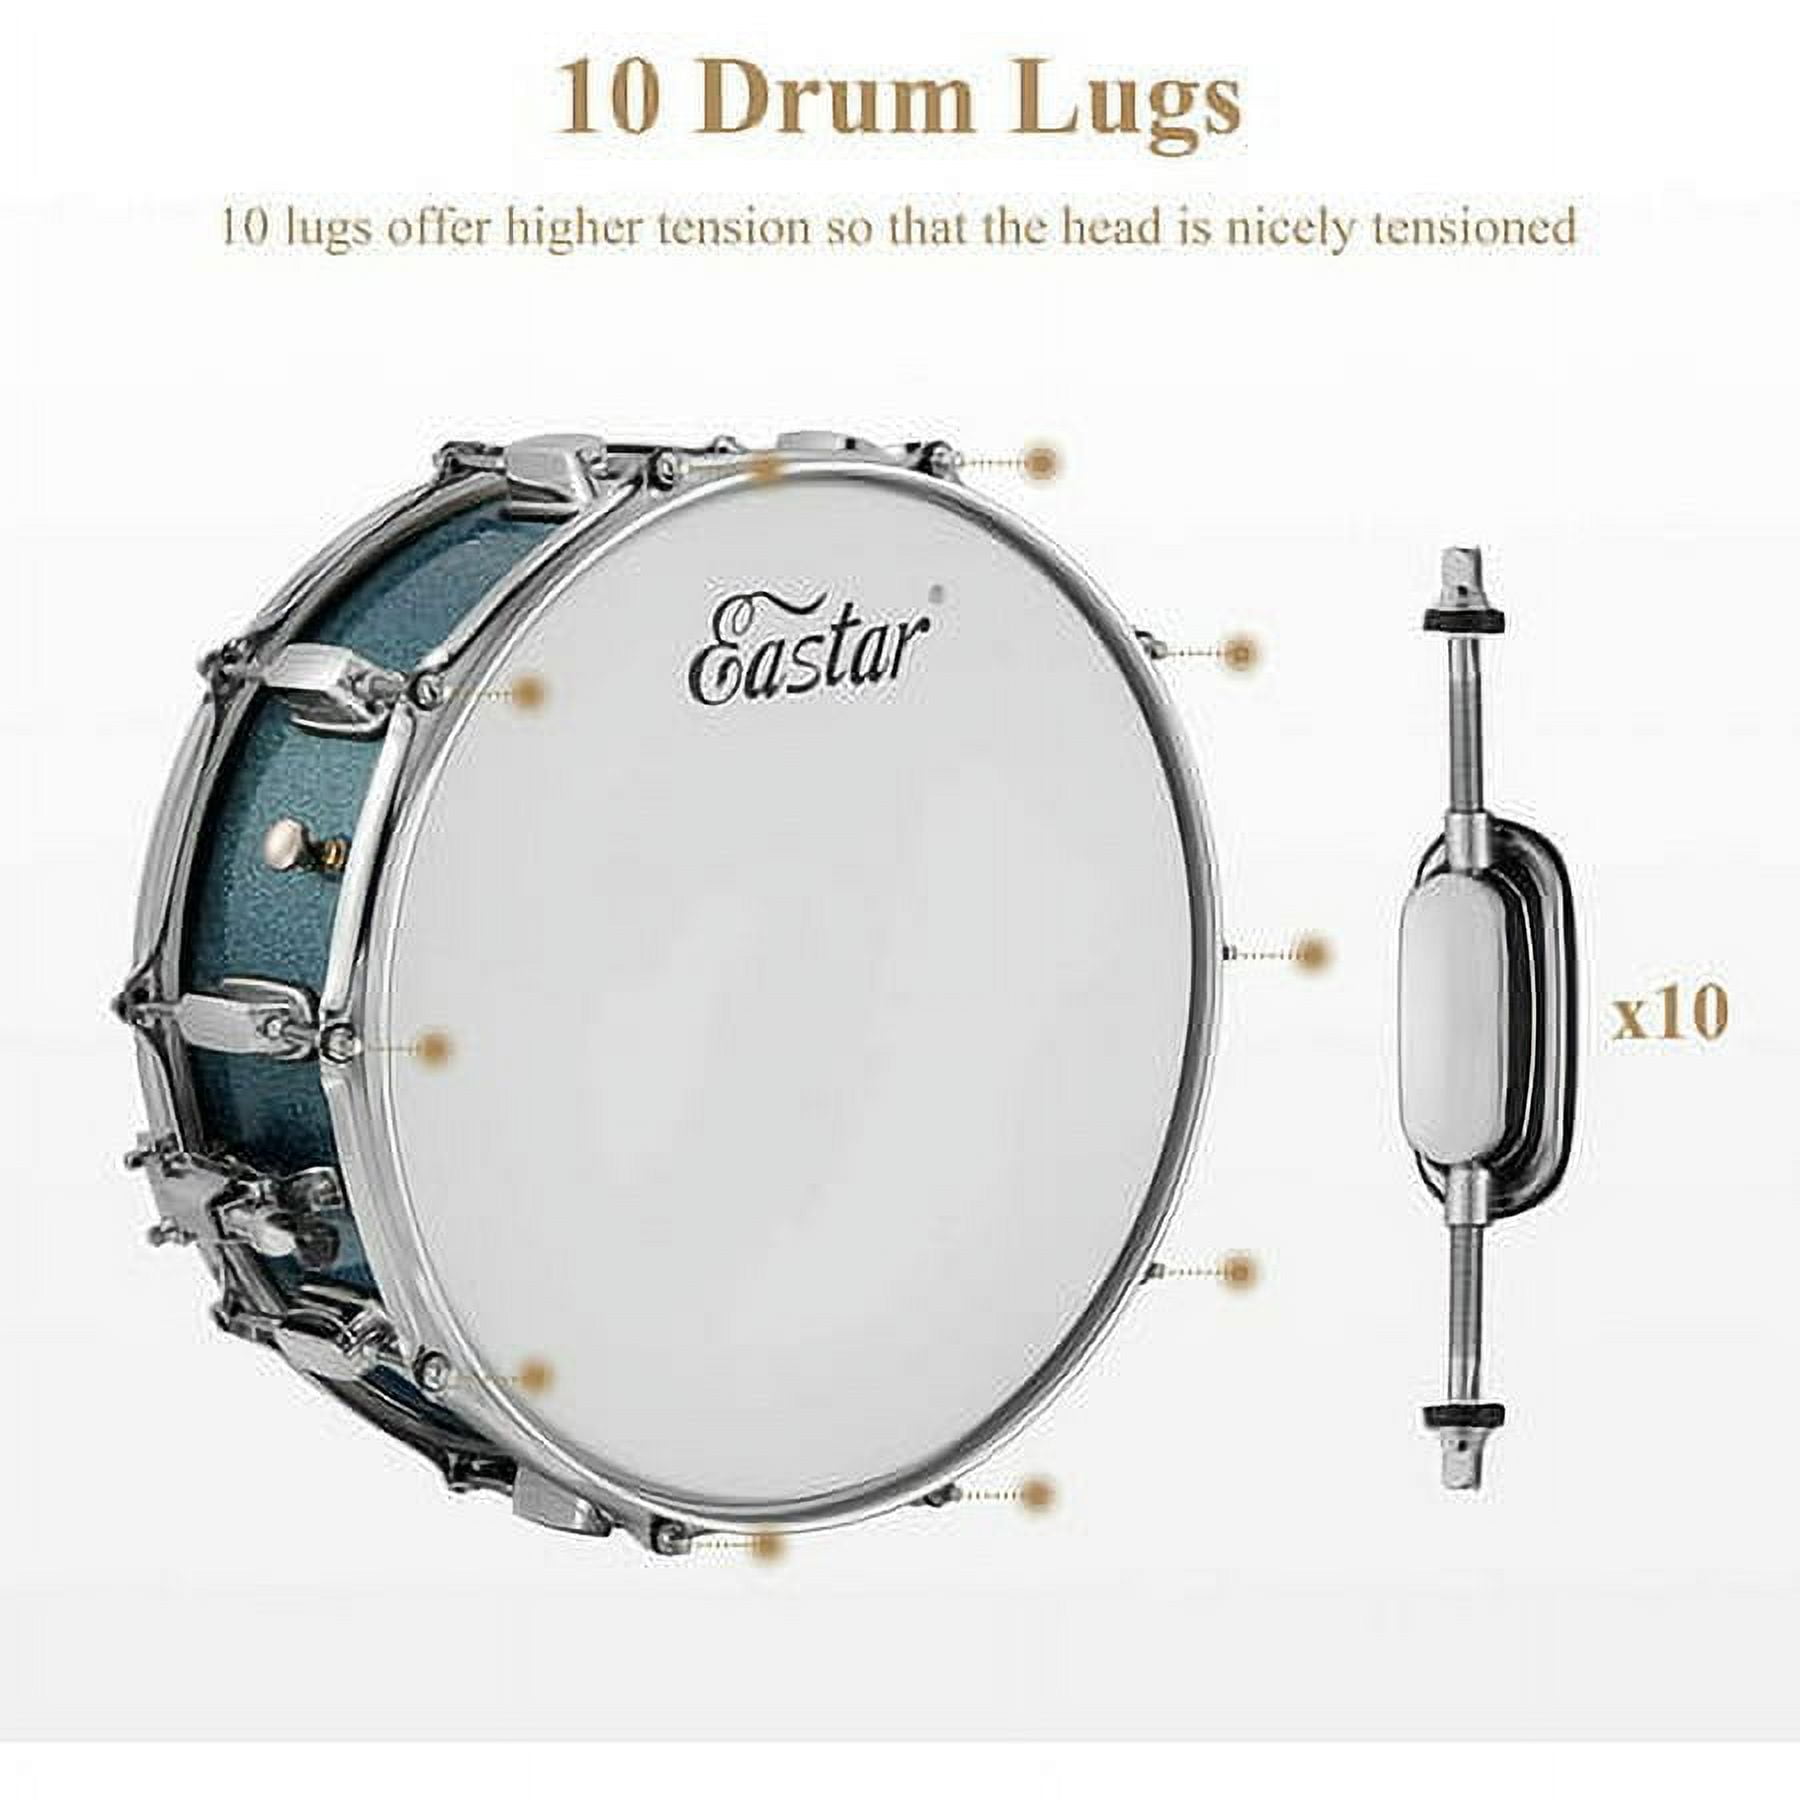 Student Eastar Pad Kit, Stand, Drum Blue Sticks, Snare Practice with Beginner Mute Starry Set